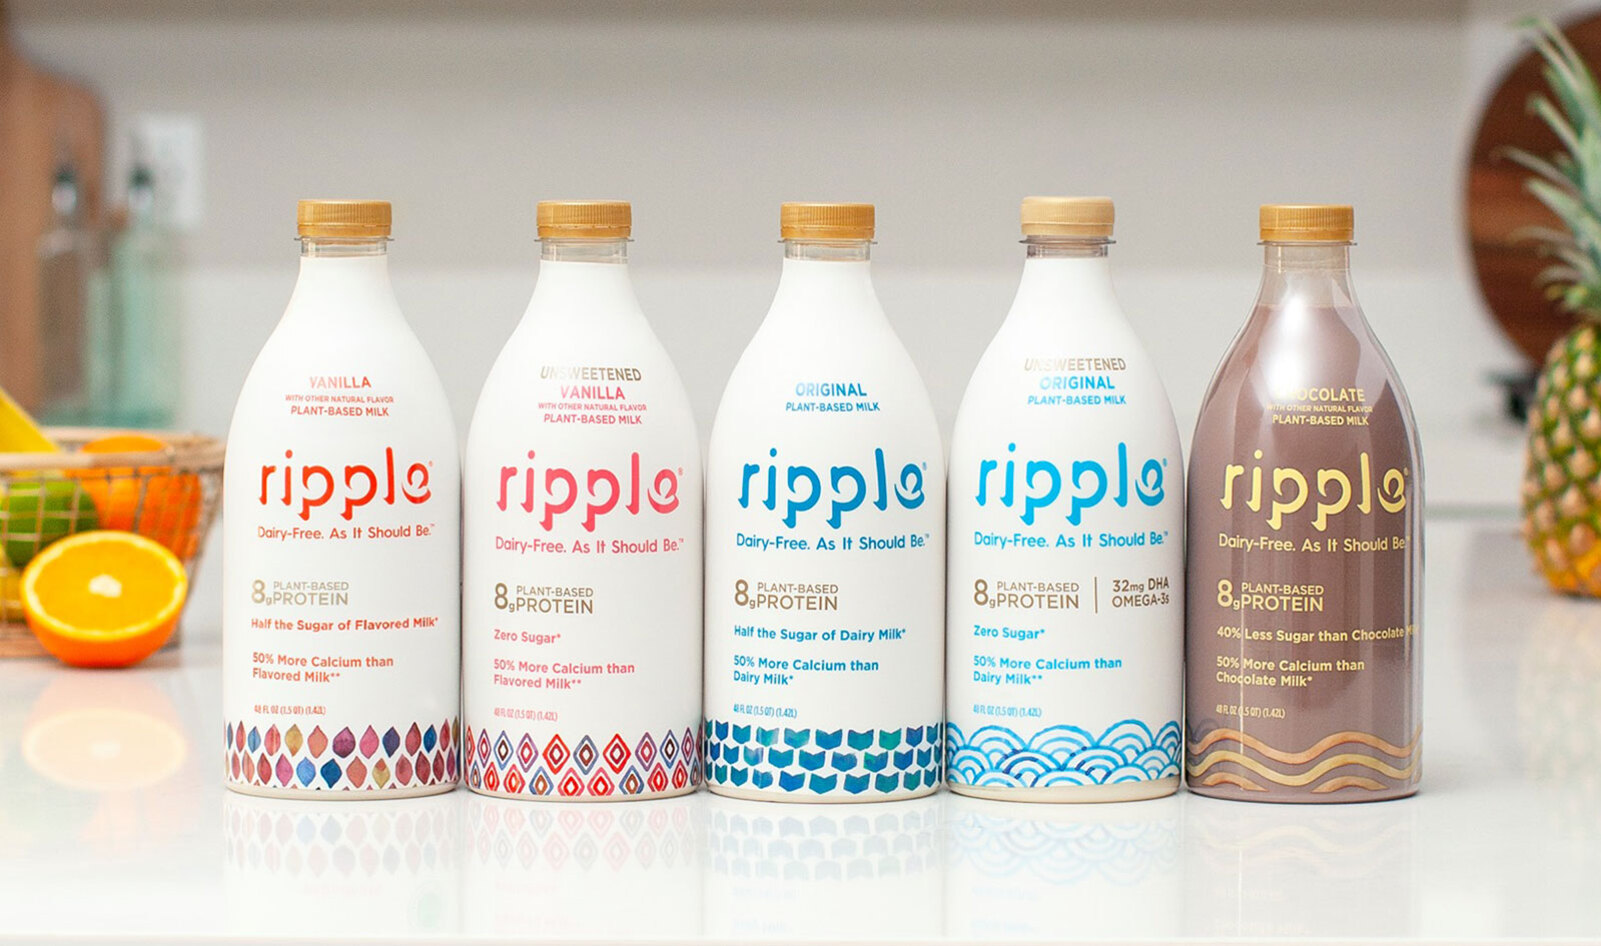 Ripple Foods Just Raised $60 Million to Make New Dairy-Free Products Out of Peas